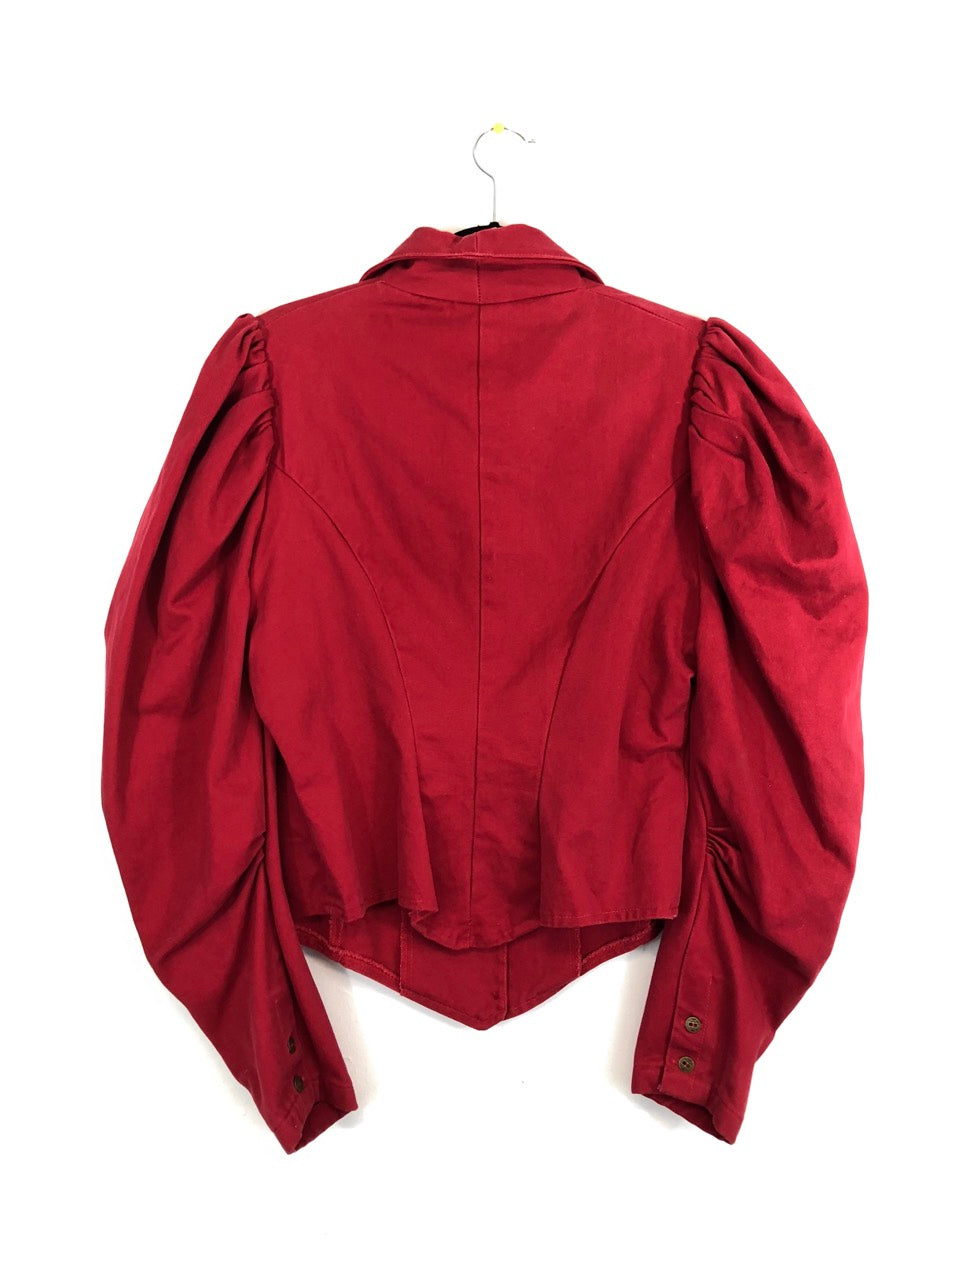 Recollections Red Denim Jacket